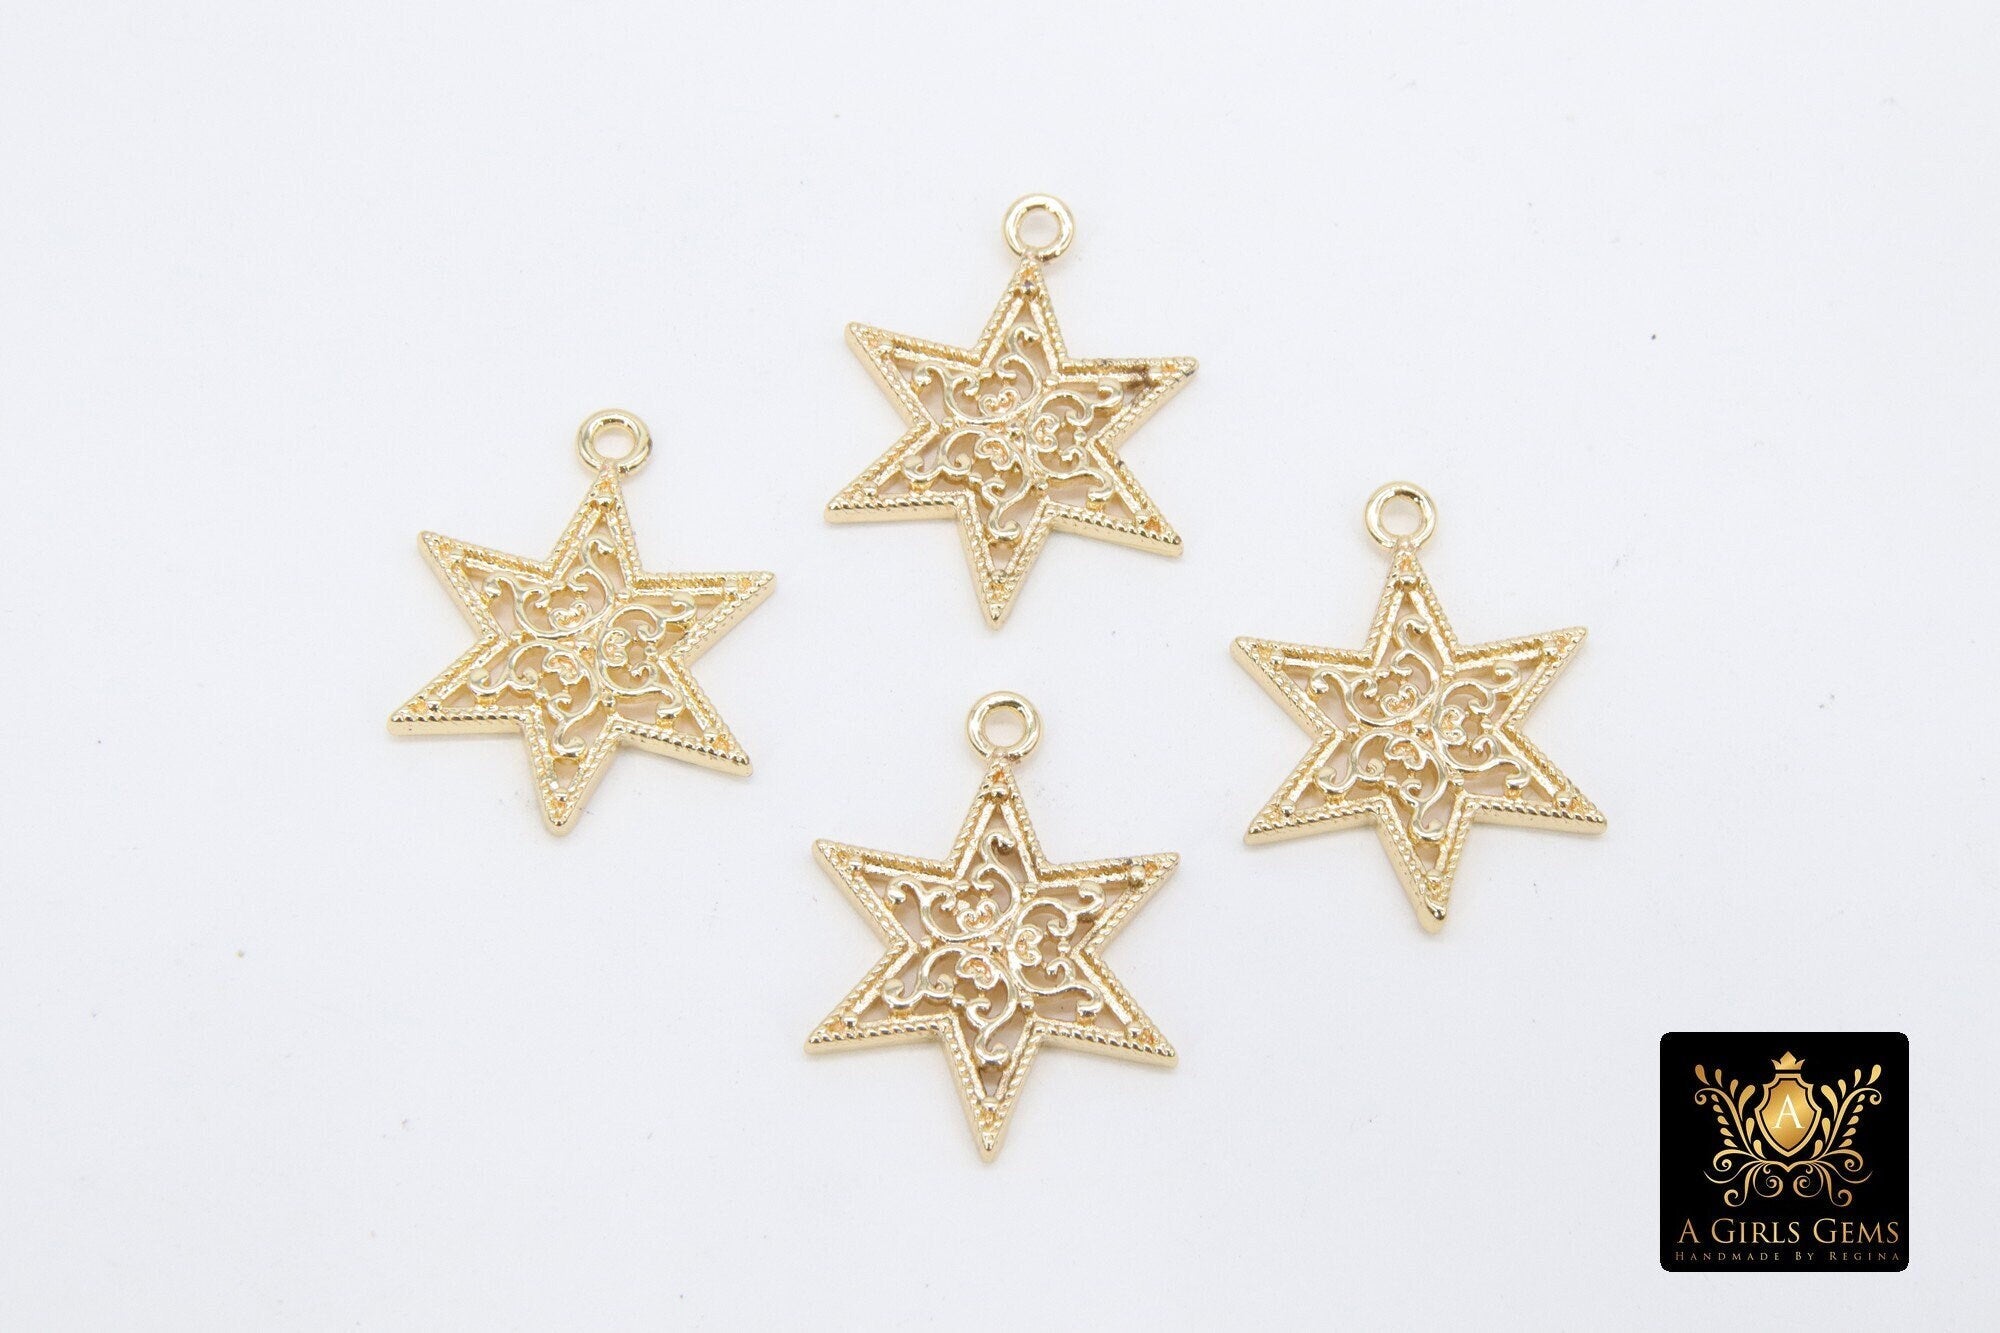 Gold Filled Star Charms, Medium Filigree Dainty Starburst Pendants #124, Bracelet, Earring or Necklace Jewelry, 17 x 22 mm